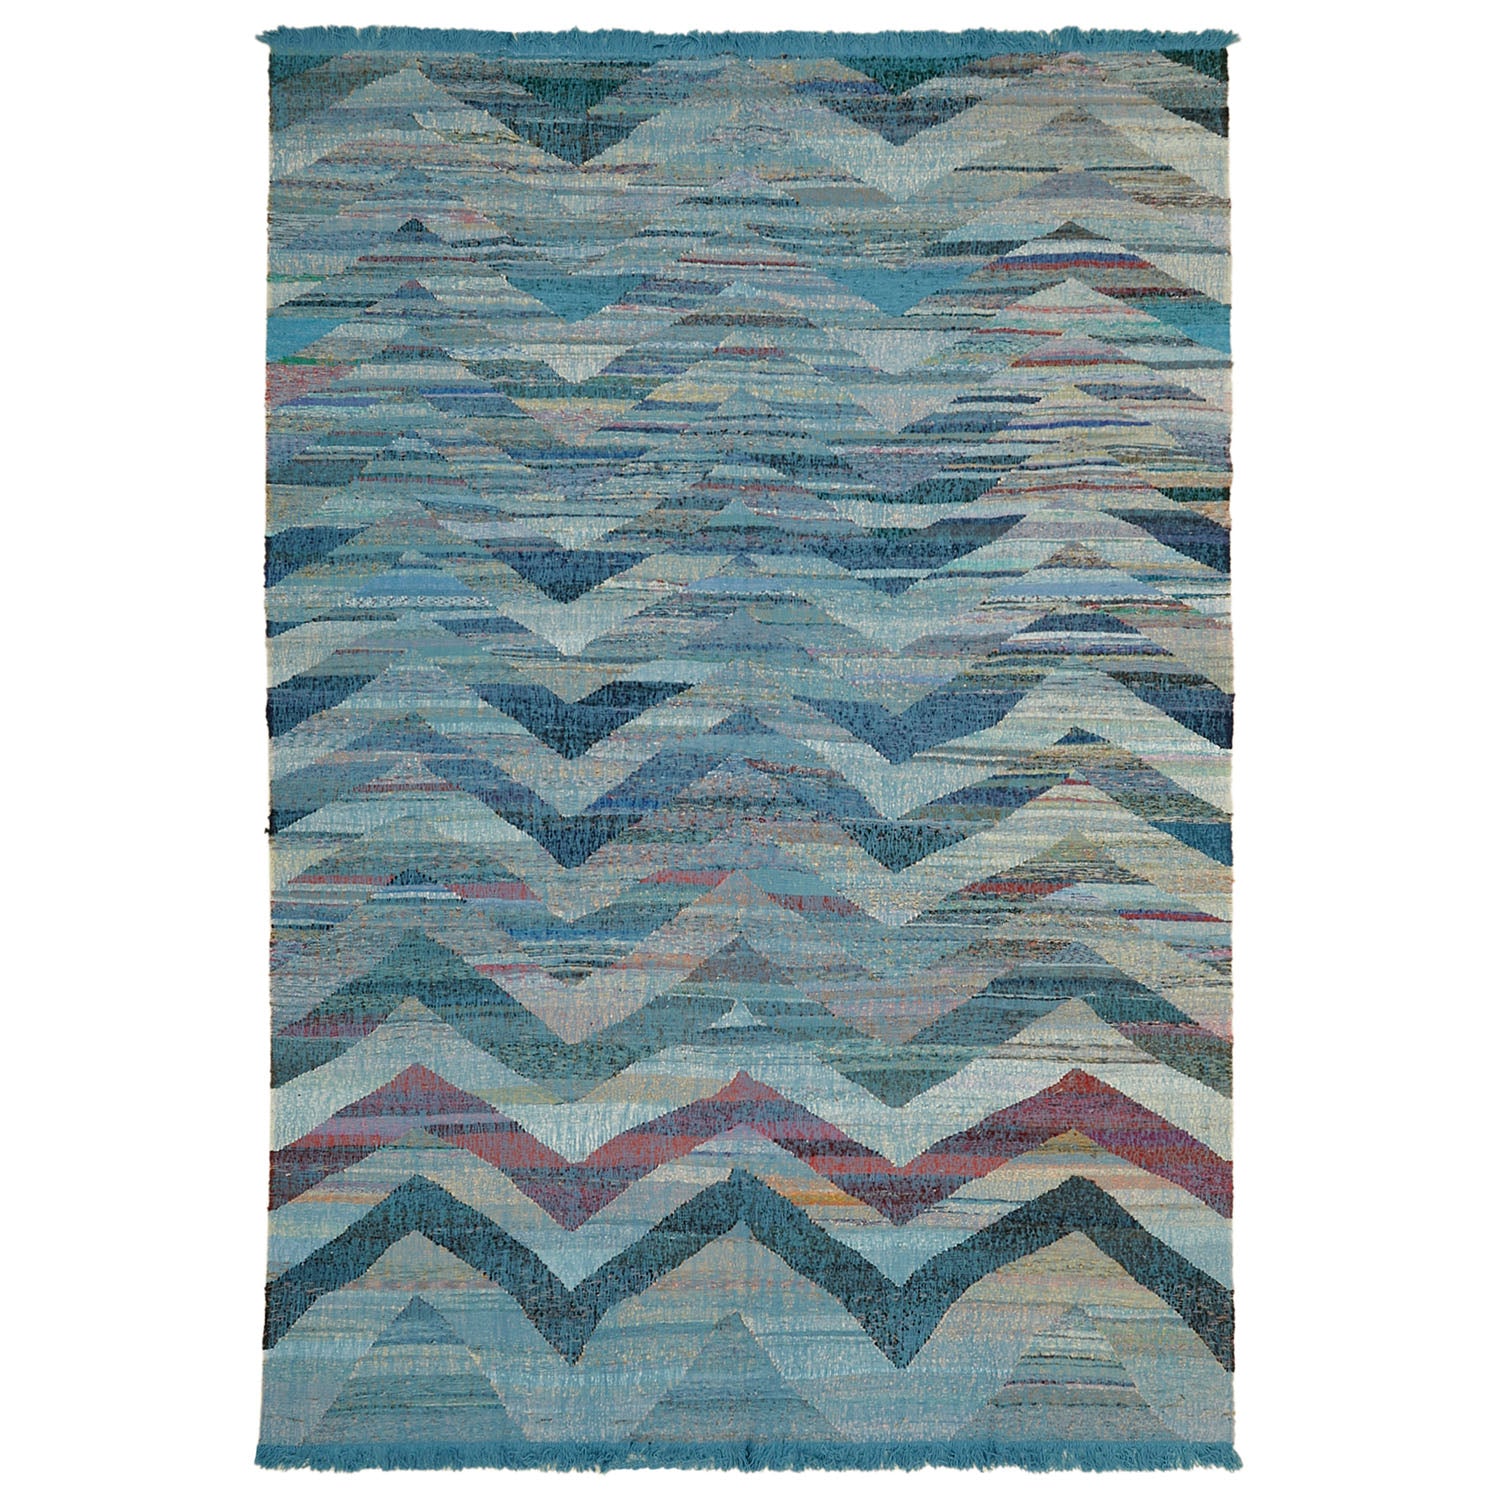 Vibrant, handcrafted rug with geometric pattern and textured design.